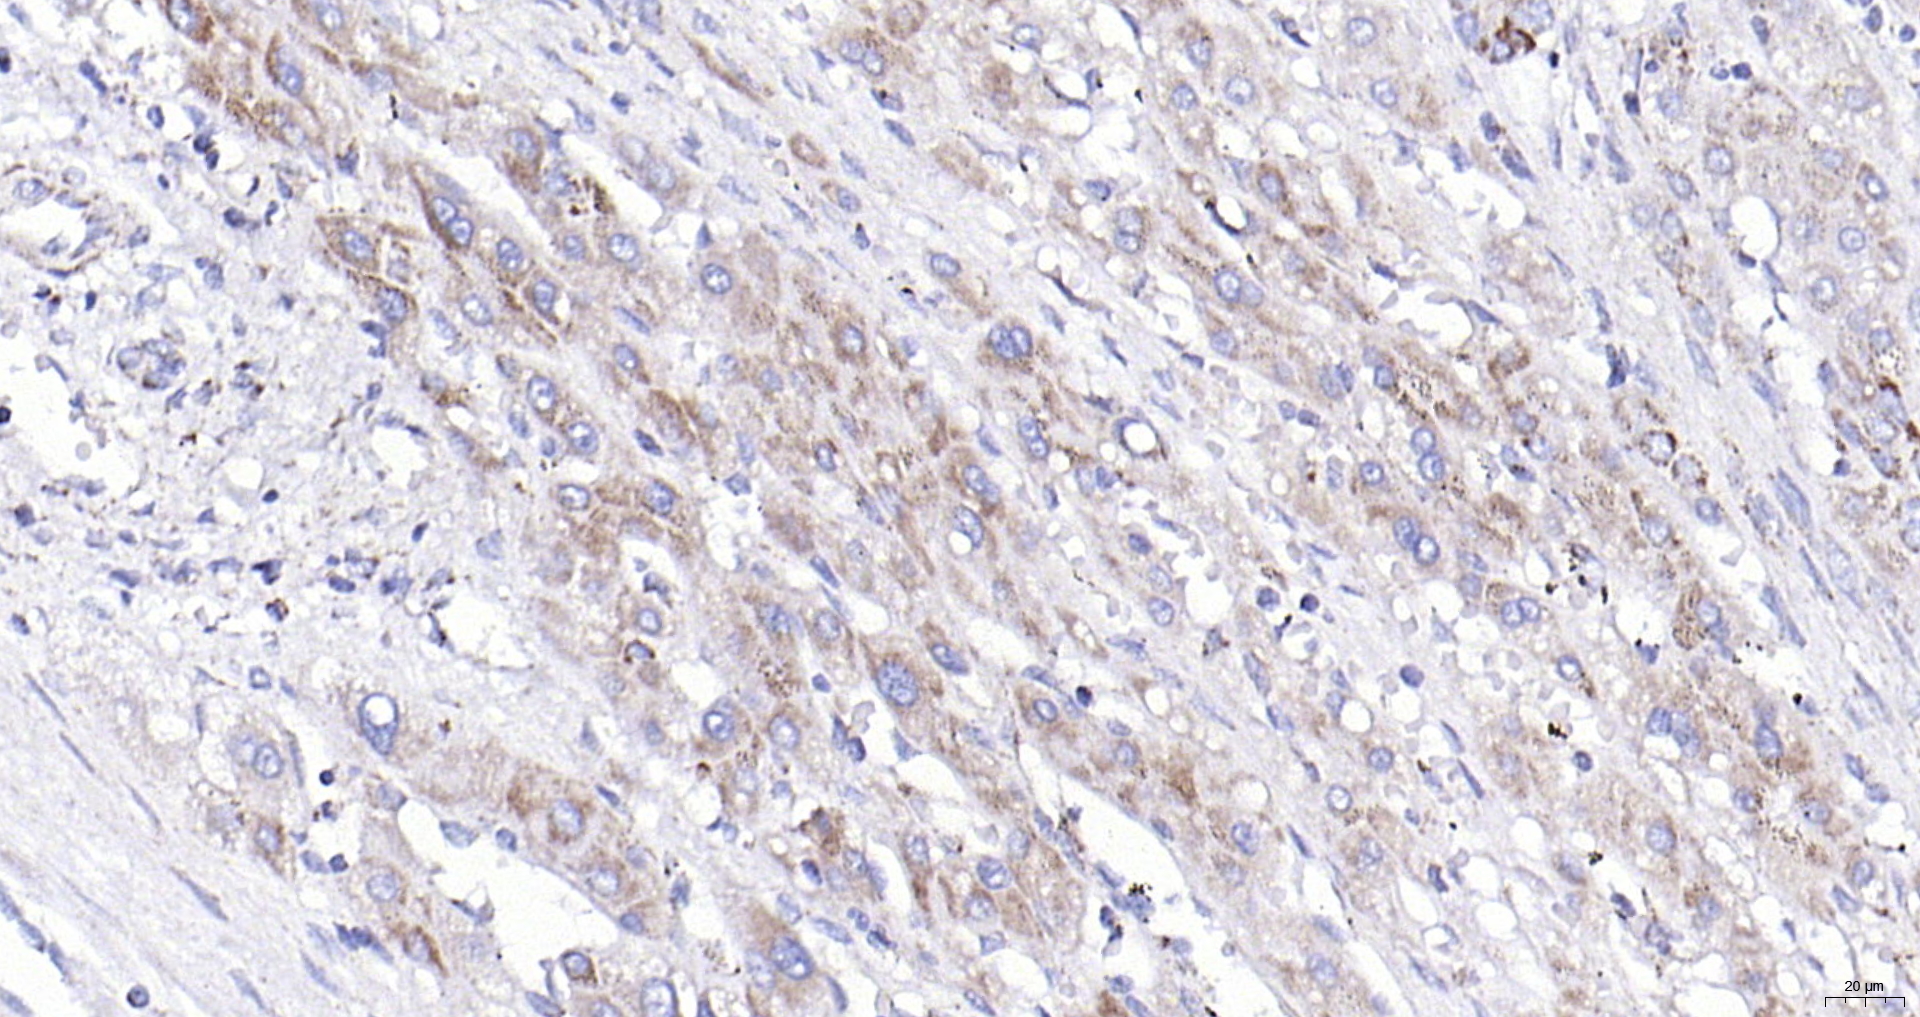 Paraformaldehyde-fixed, paraffin embedded (human liver carcinoma); Antigen retrieval by boiling in sodium citrate buffer (pH6.0) for 15min; Block endogenous peroxidase by 3% hydrogen peroxide for 20 minutes; Blocking buffer (normal goat serum) at 37°C for 30min; Antibody incubation with (COX6c) Polyclonal Antibody, Unconjugated (bs-12925R) at 1:200 overnight at 4°C, followed by operating according to SP Kit(Rabbit) (sp-0023) instructionsand DAB staining.